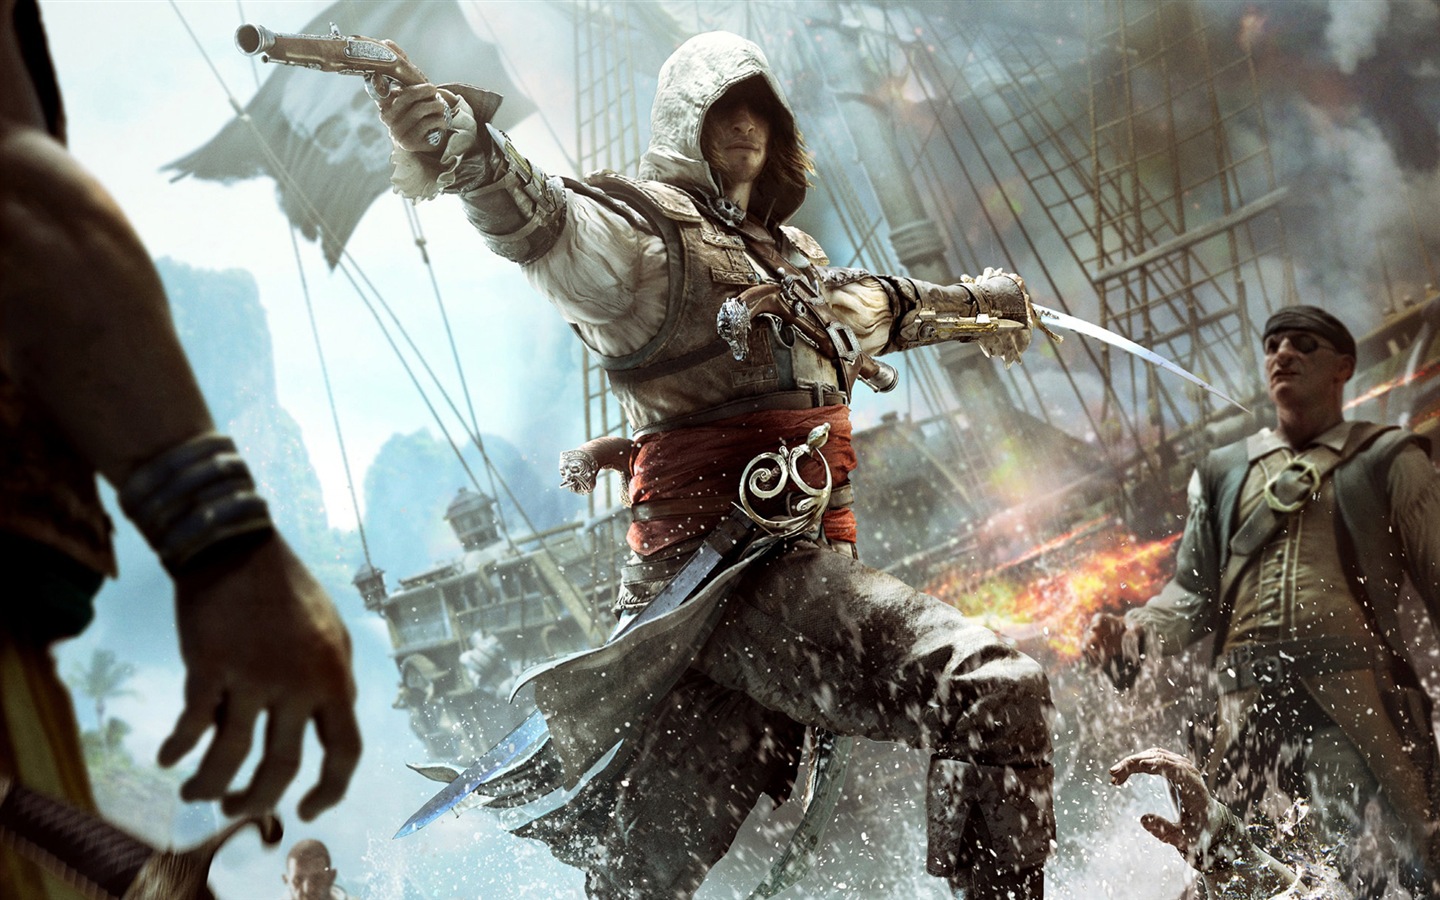 Creed IV Assassin: Black Flag HD wallpapers #6 - 1440x900